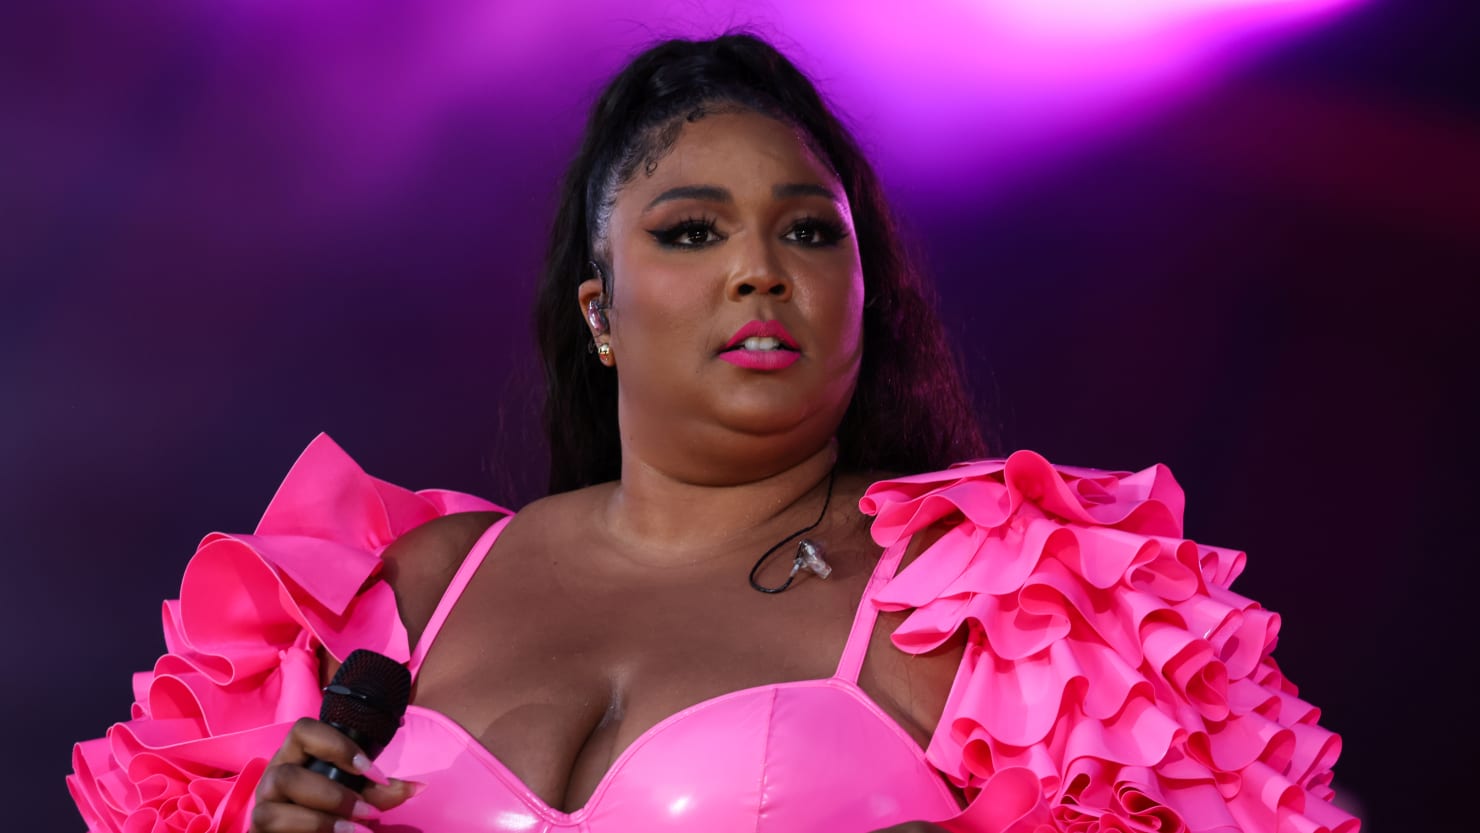 Here’s why Lizzo was completely removed from Super Bow LVll